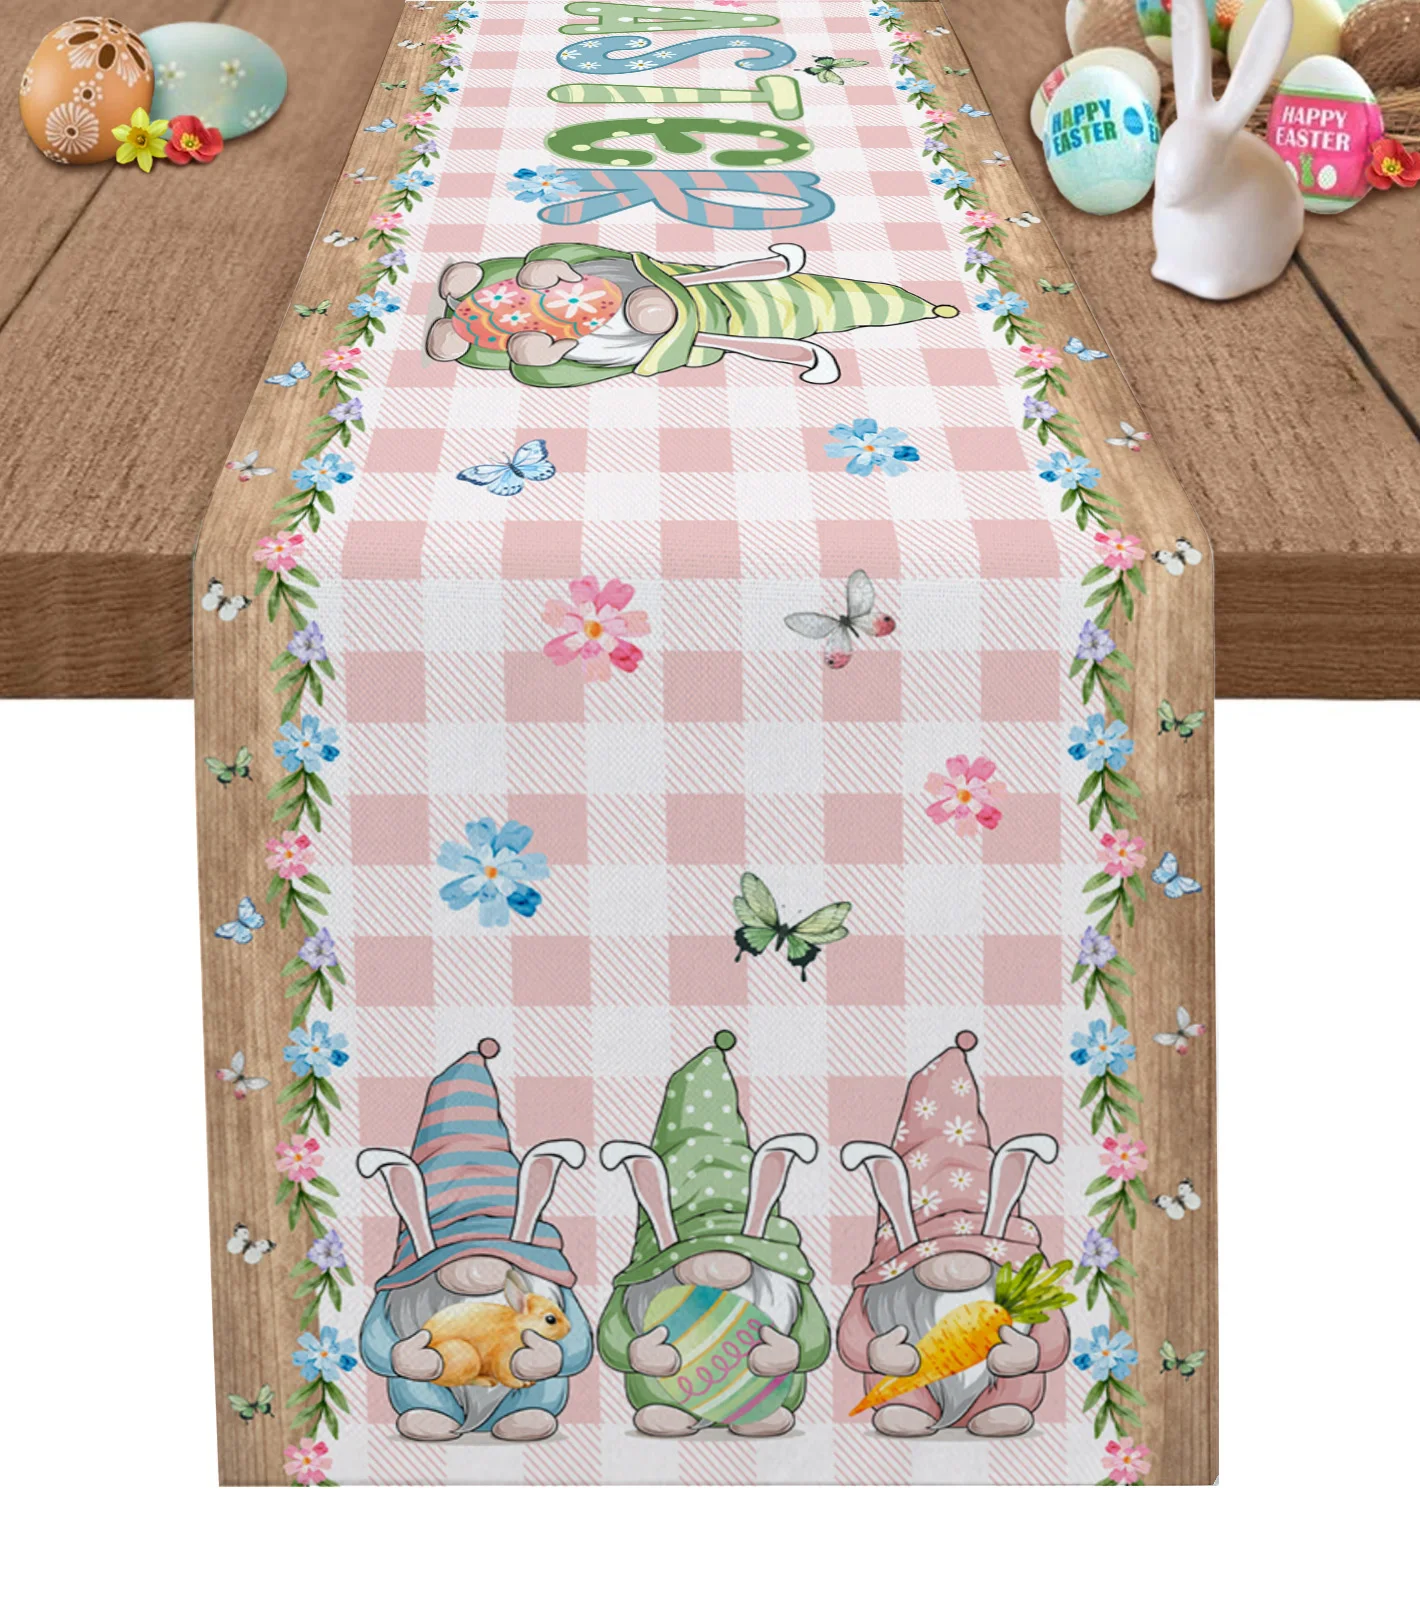 

Easter Bunny Egg Gnome Table Runner Wedding Festival Table Decoration Home Decor Kitchen Table Runners Placemats